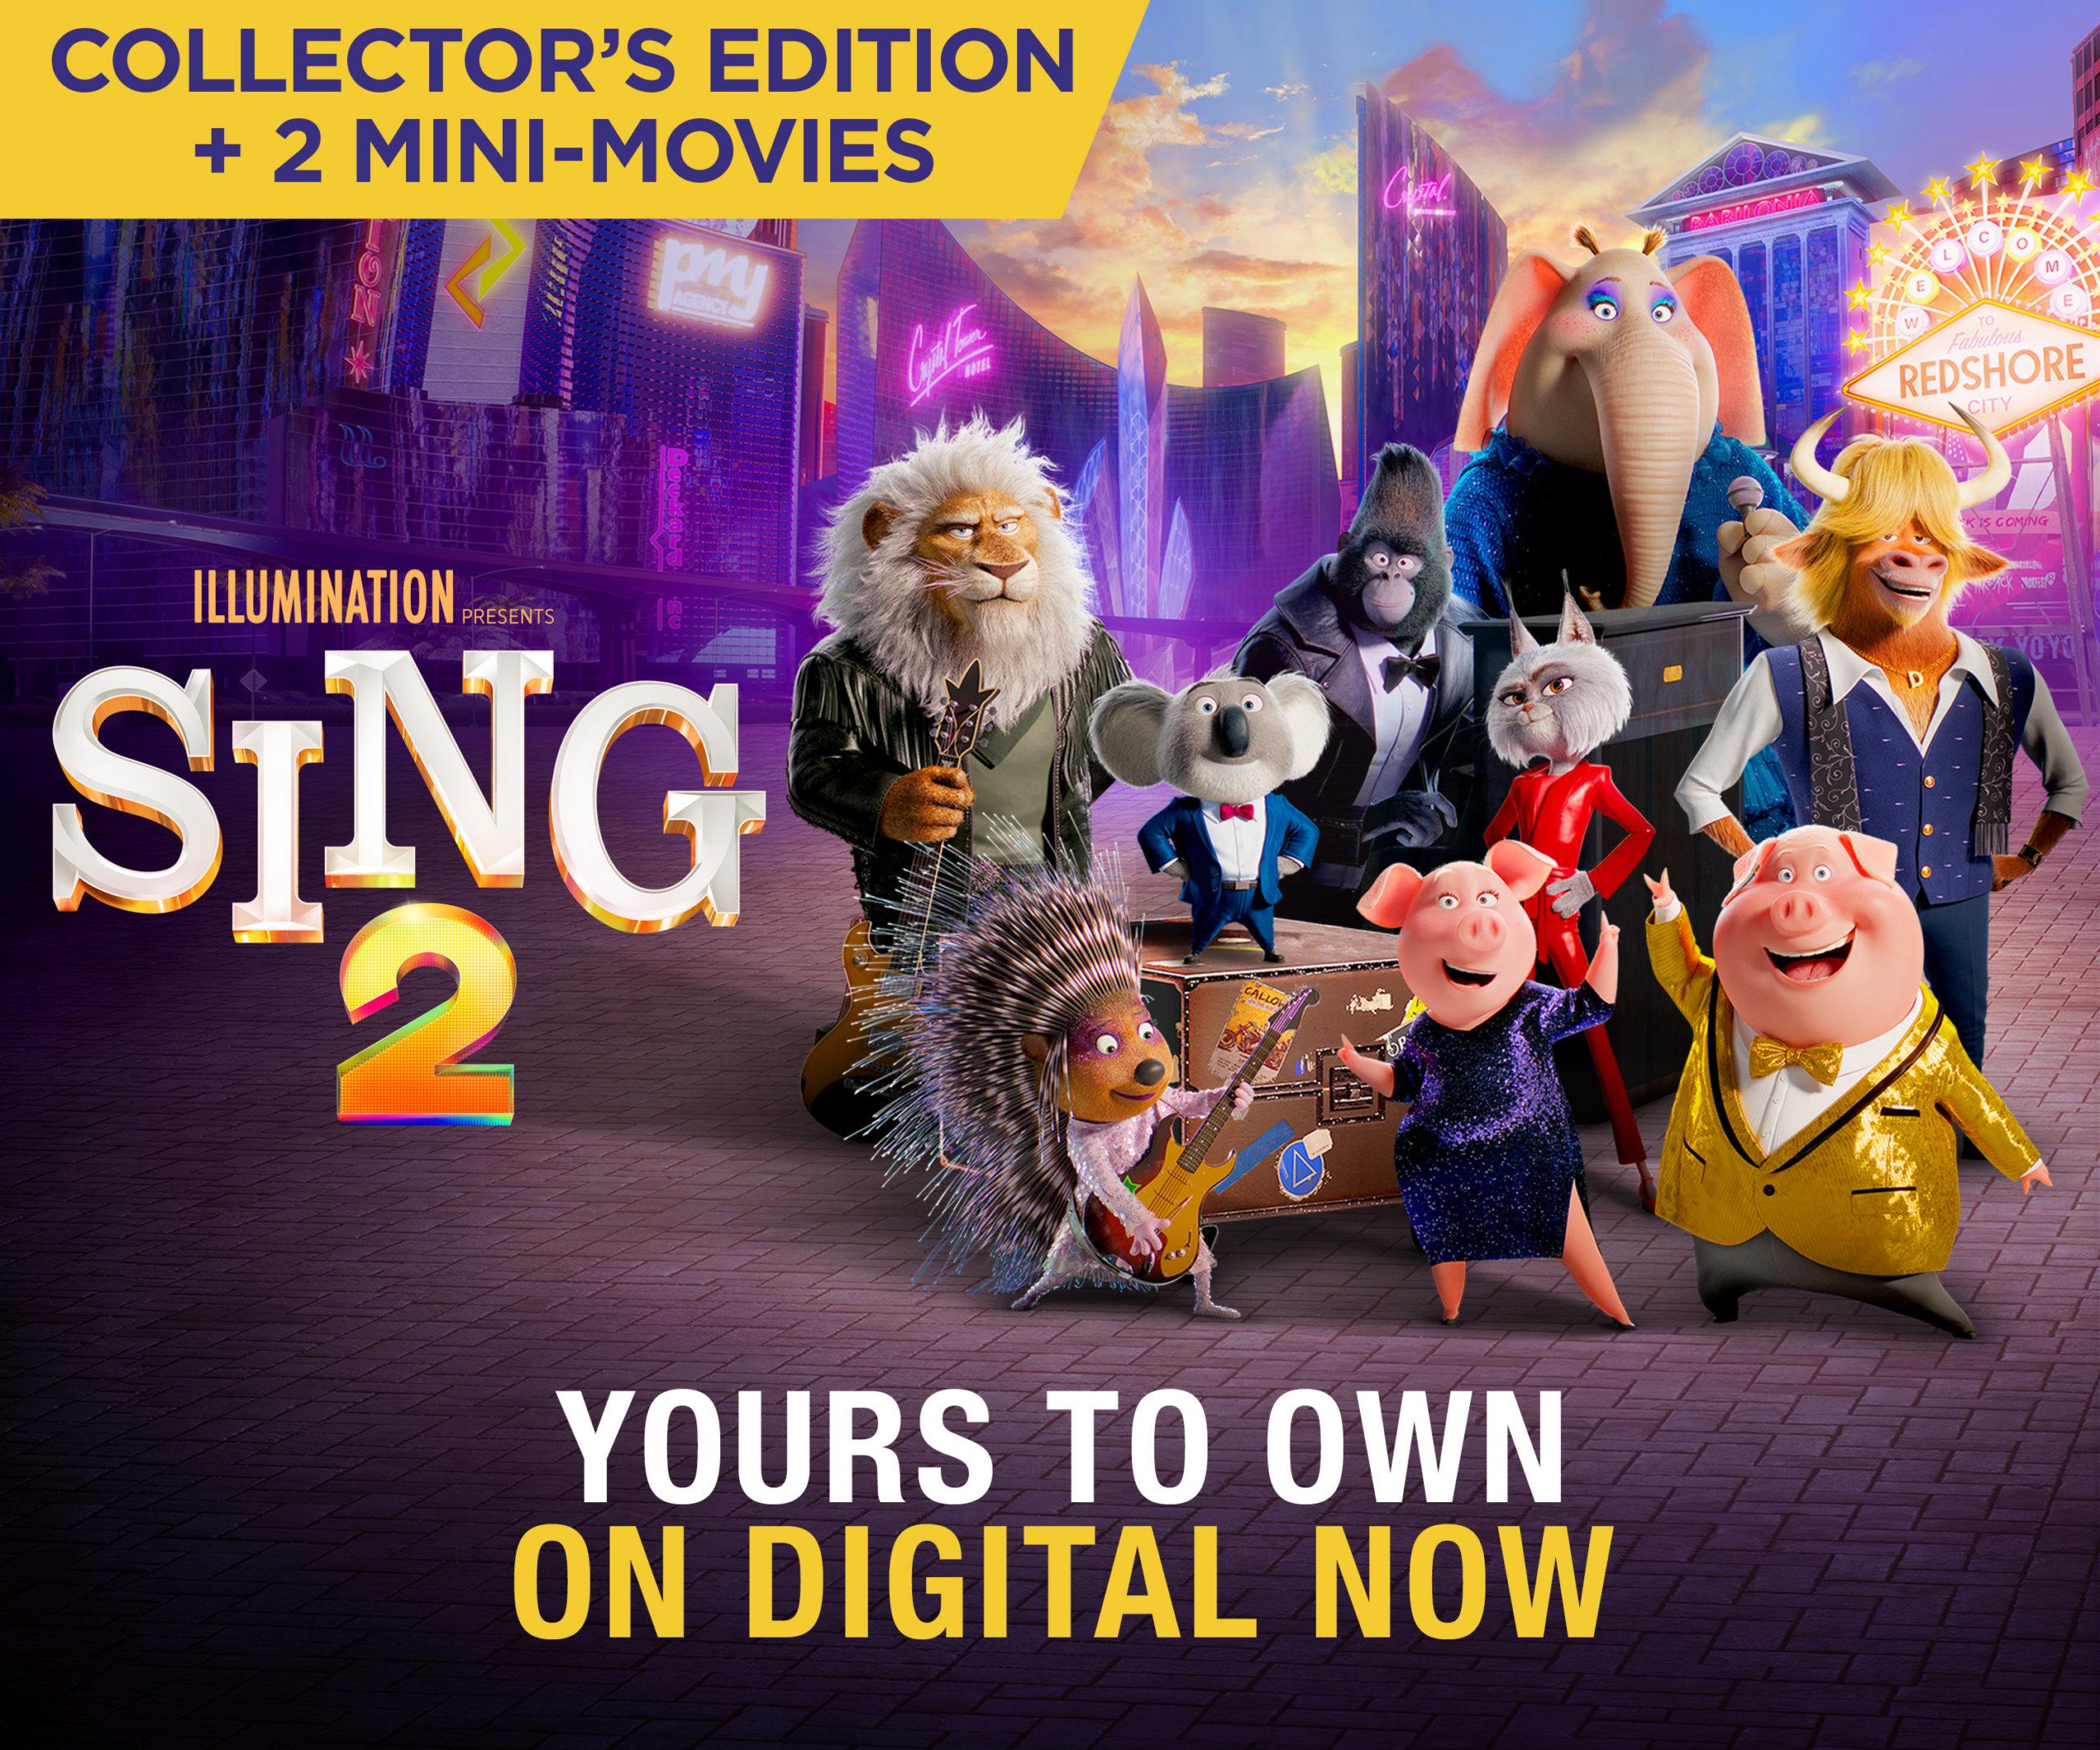 See Five things that you may not know about SING 2. #Sing2 @singmovie -  Criticologos